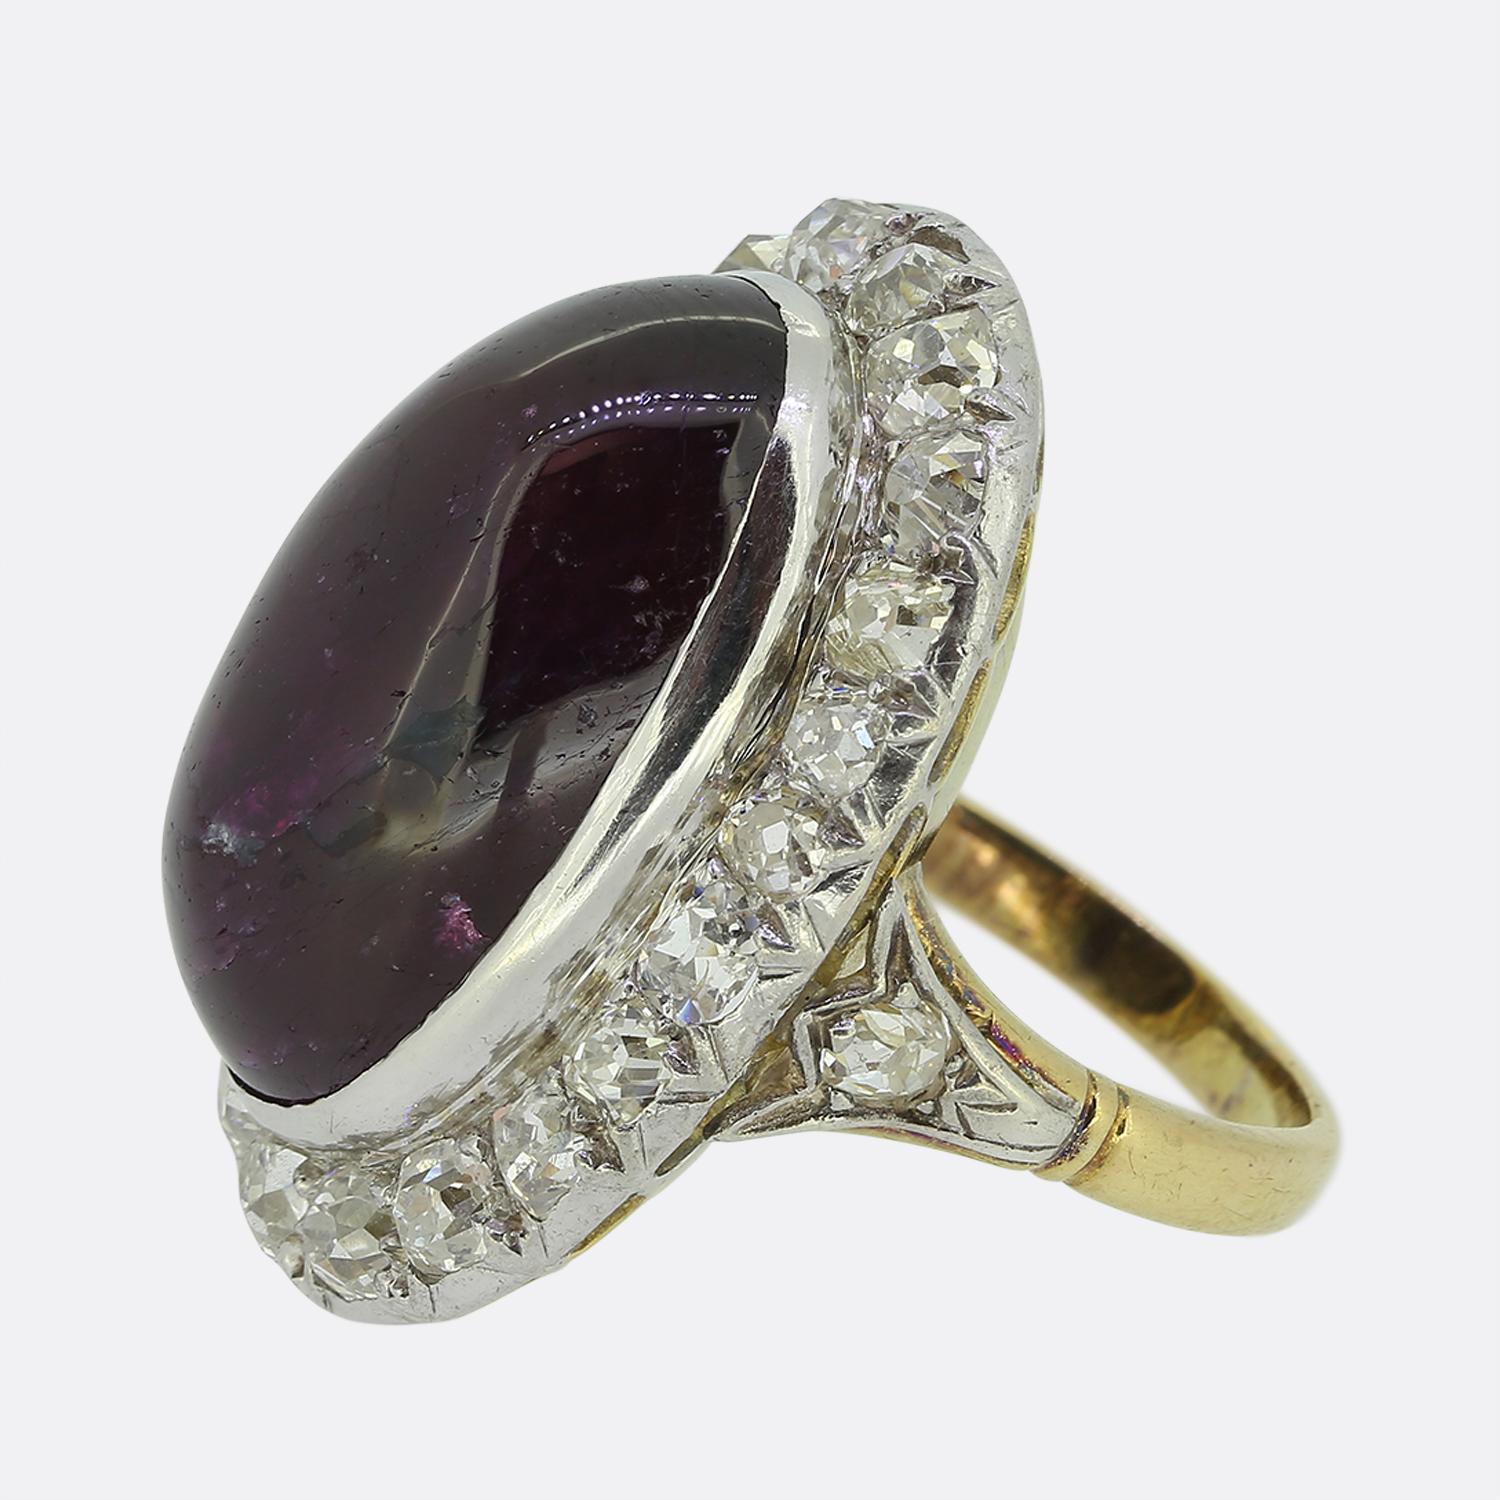 Here we have an impressive 18ct yellow gold ruby and diamond cluster ring. At the centre of the face we find a large oval cabochon ruby which is a dark red hue. The ruby is then surrounded by contrasting stunning bright white old cut diamonds that